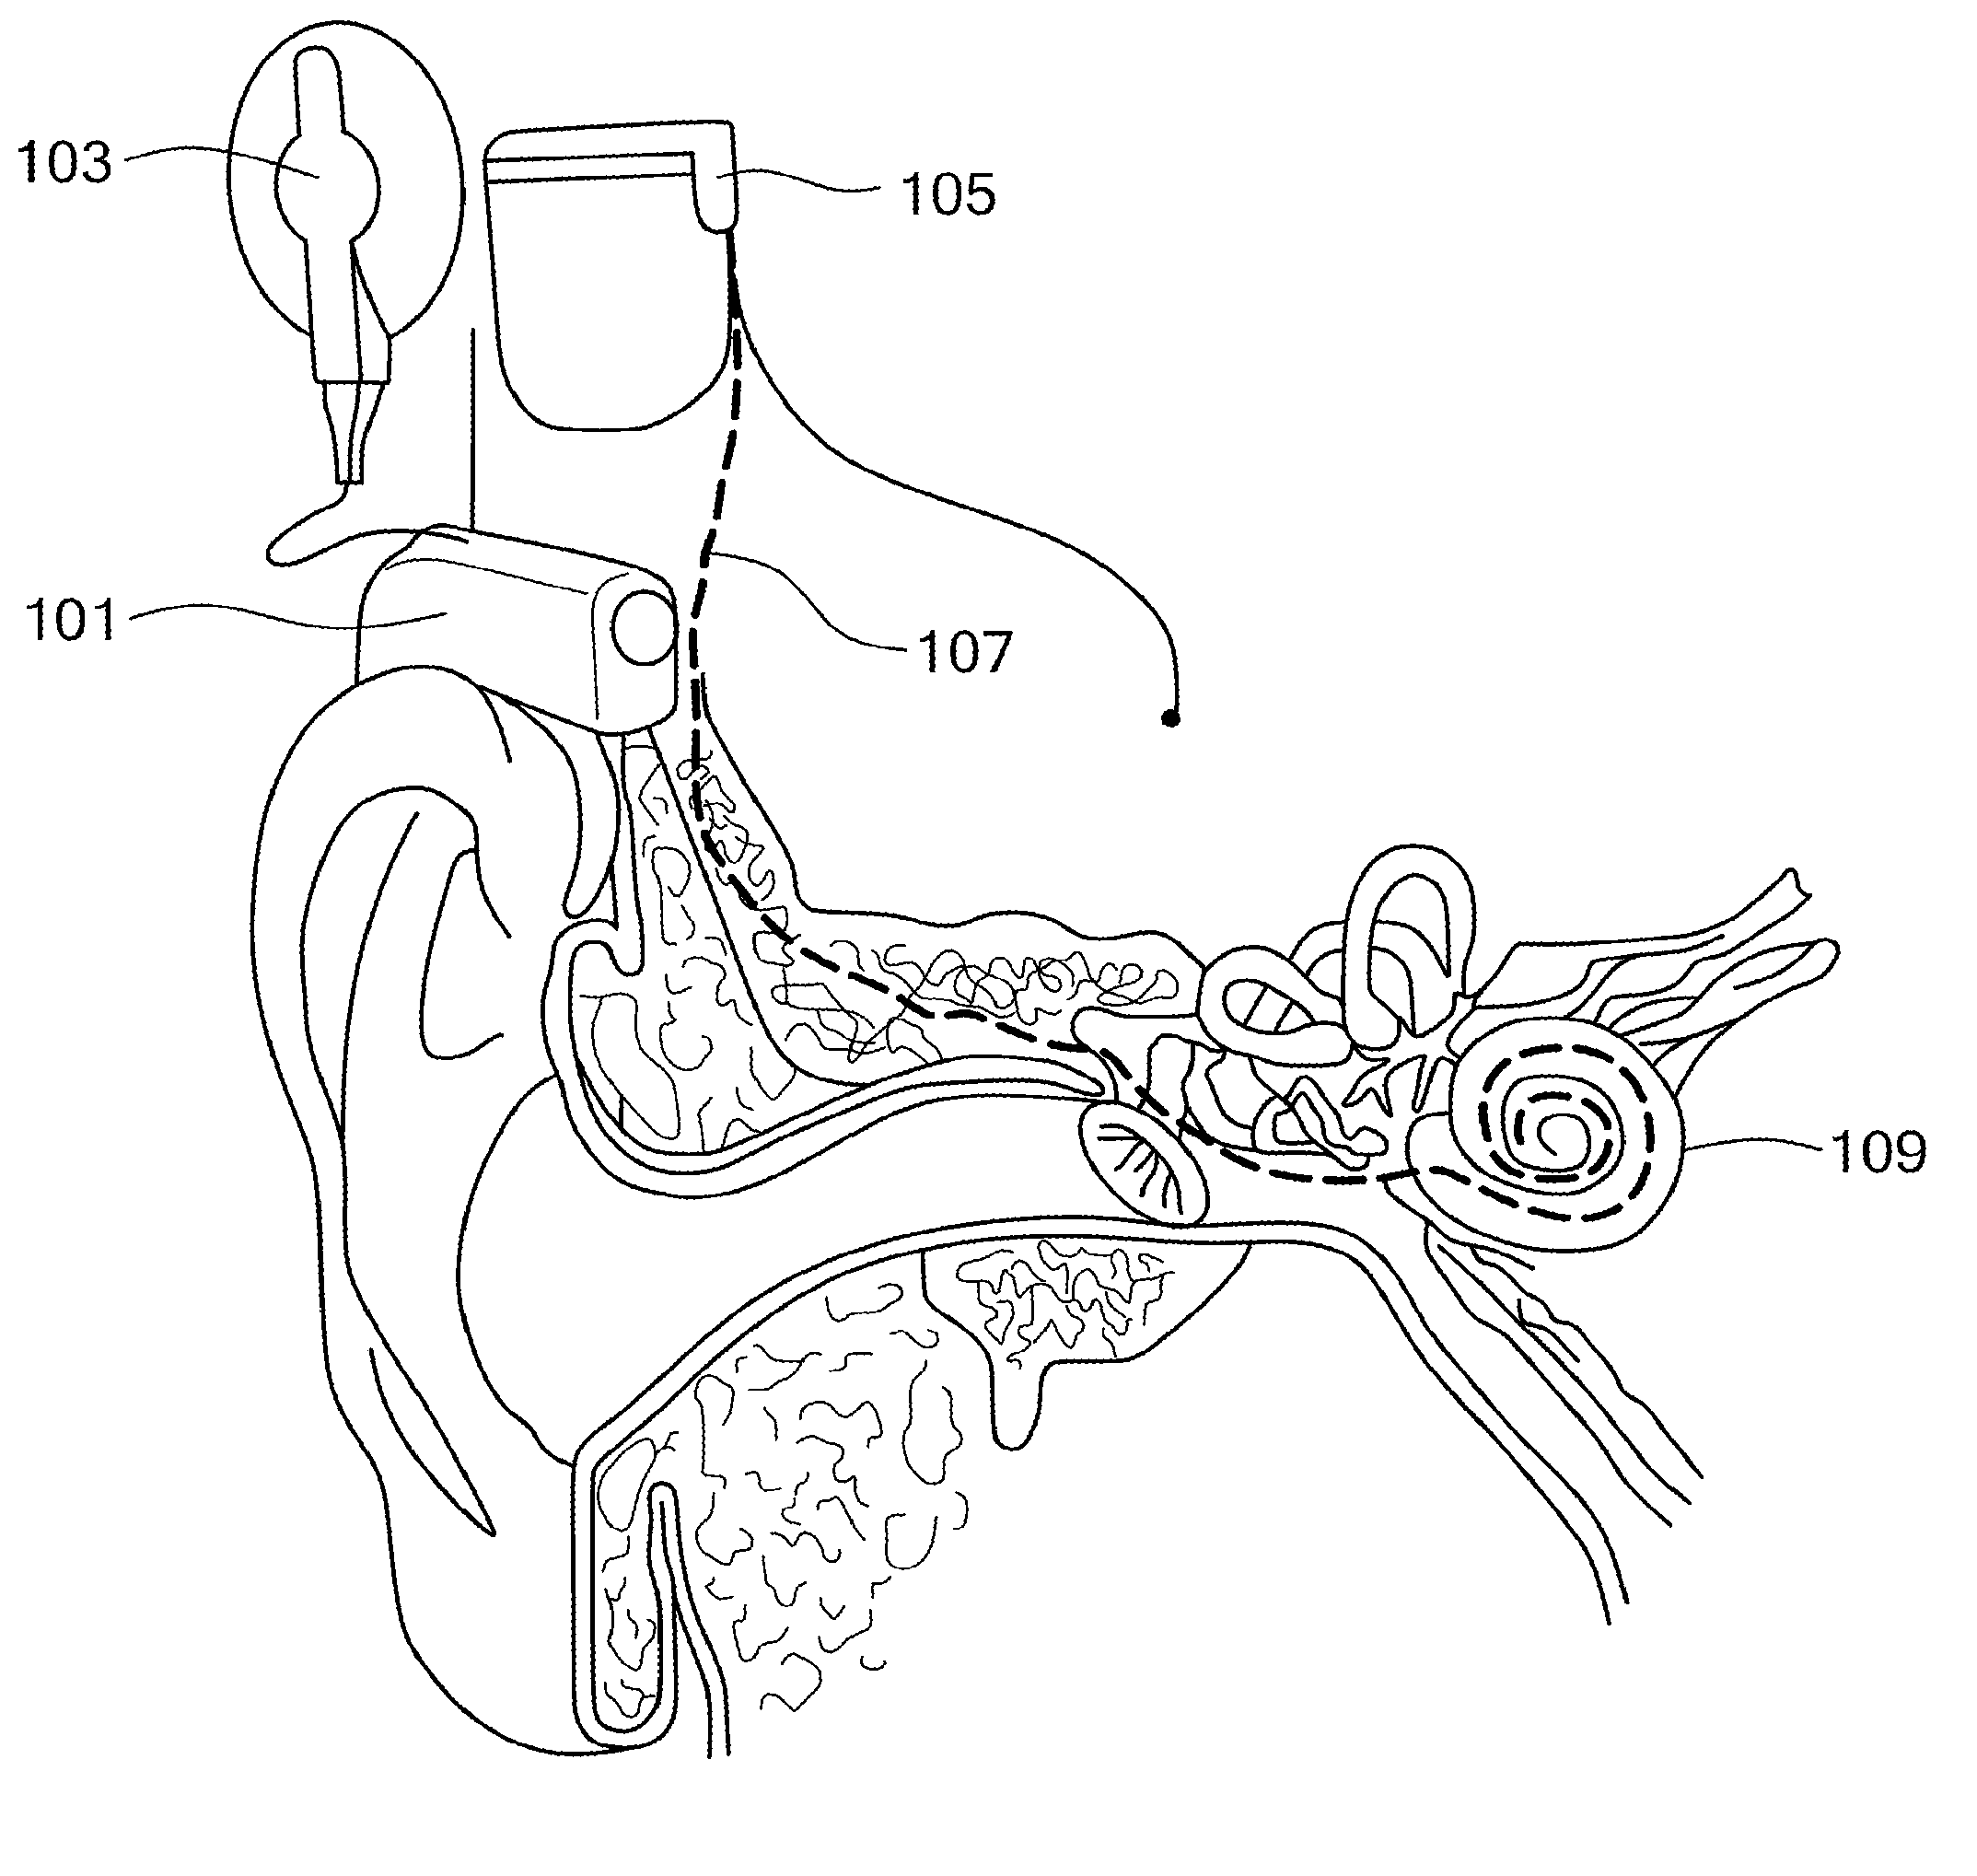 Cochlear implant stimulation with variable number of electrodes